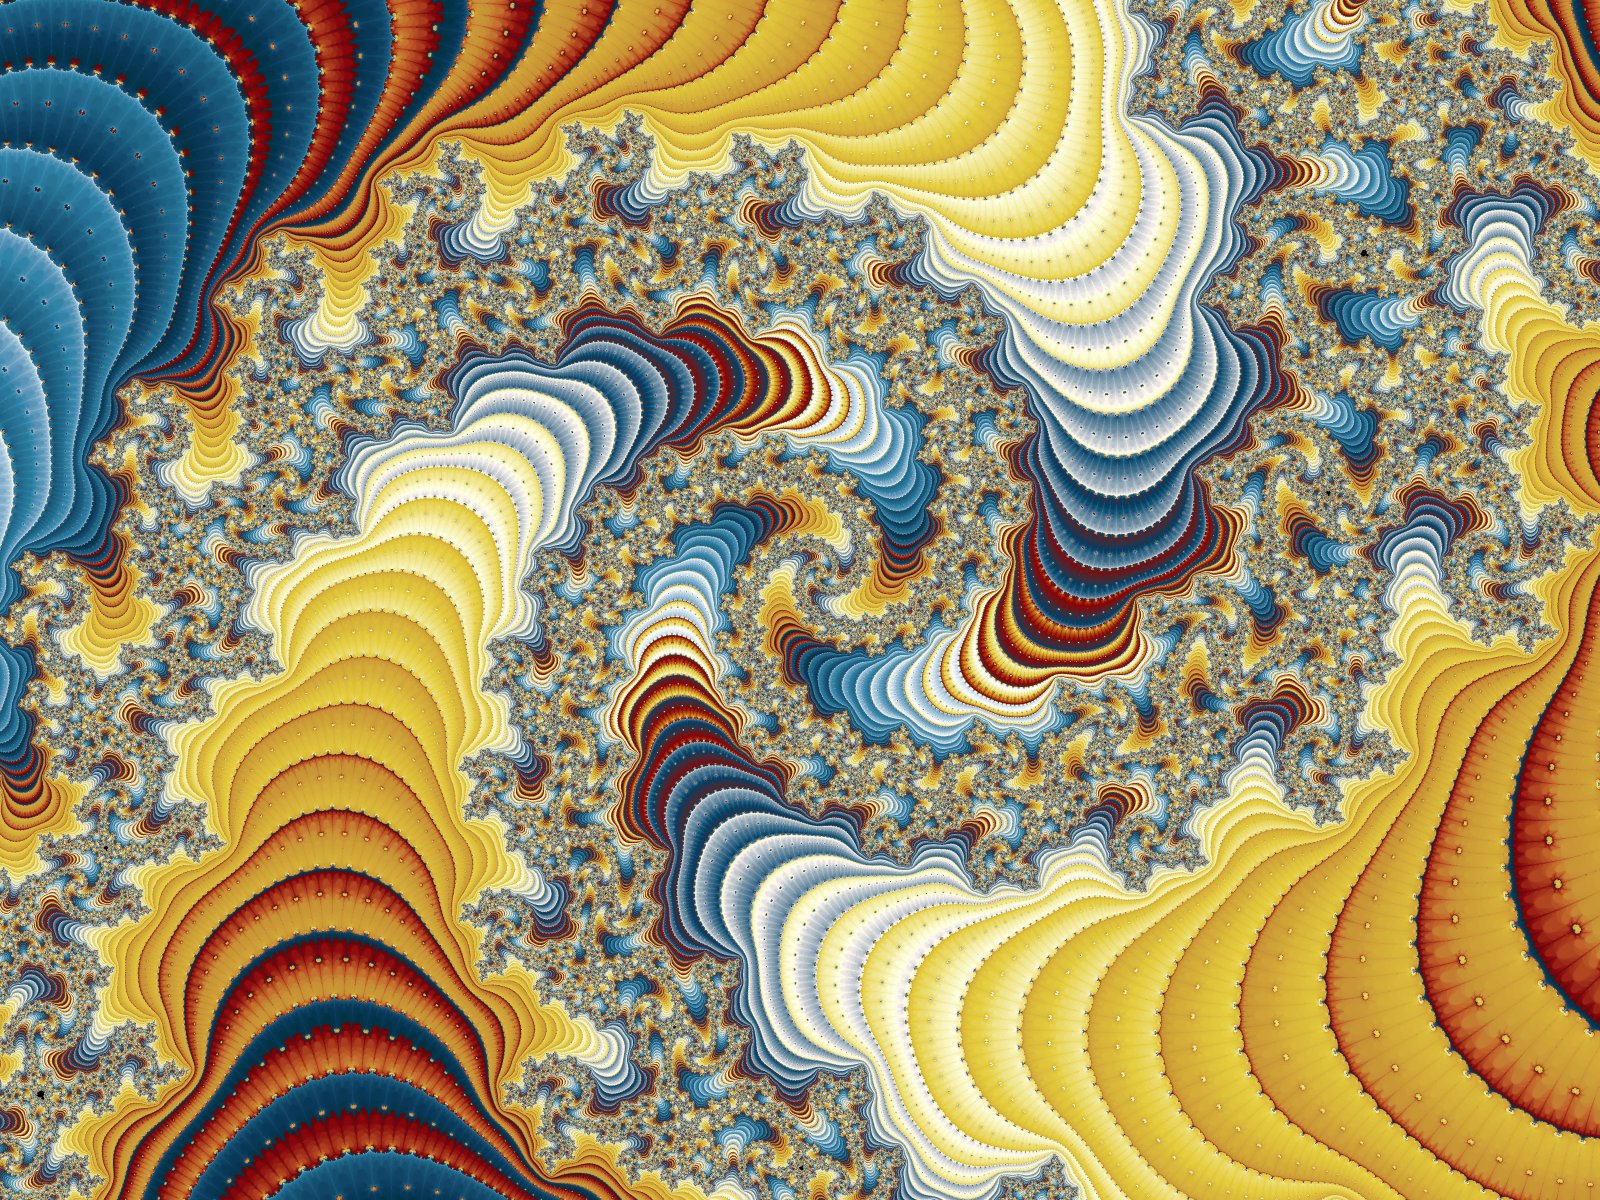 Remarkable Acid Wallpapers Hd Te
a Trip To Elsewhere - Trip Fractal - HD Wallpaper 